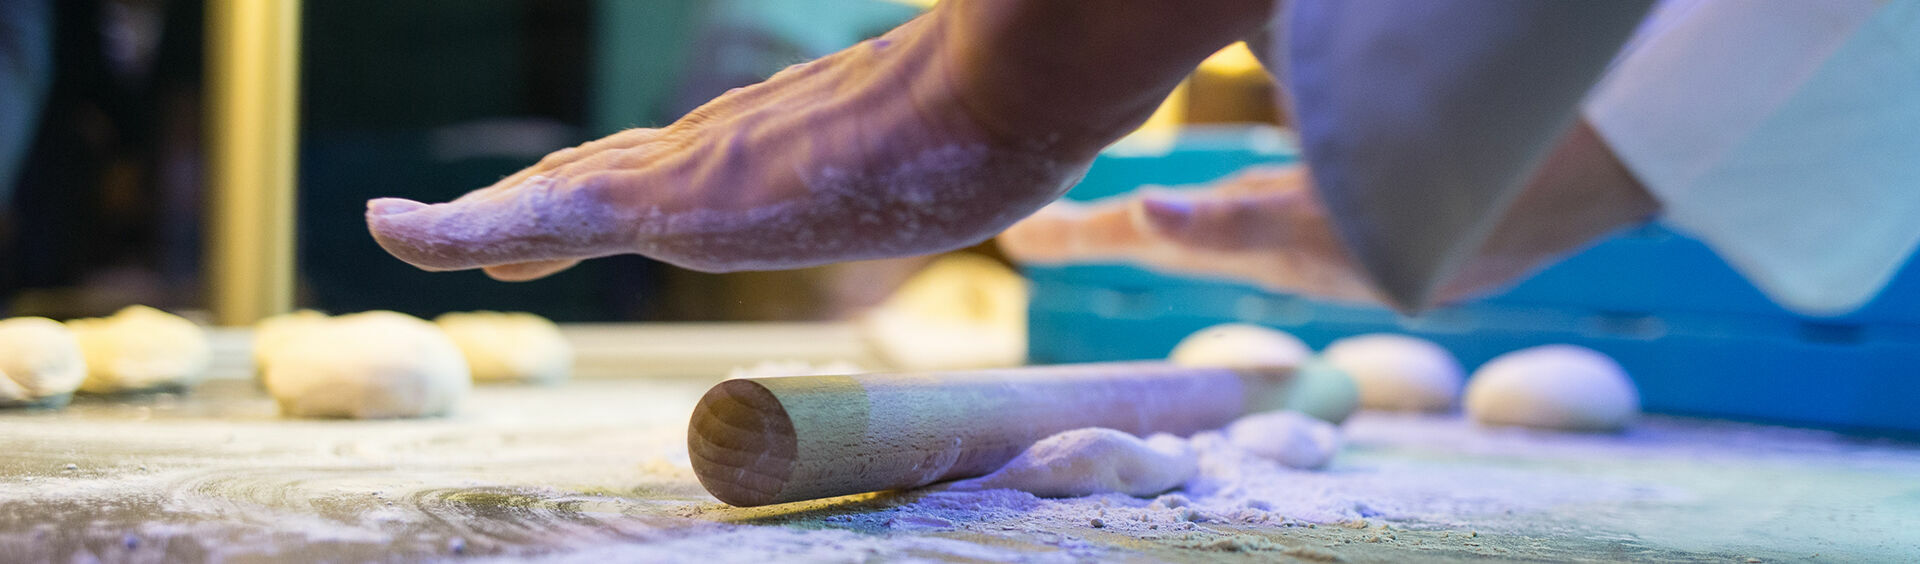 Alexander Adler runs the Adler bakery in Achenkirch in the 4th generation. This photo shows the master baker kneading and shaping delicious baked goods.